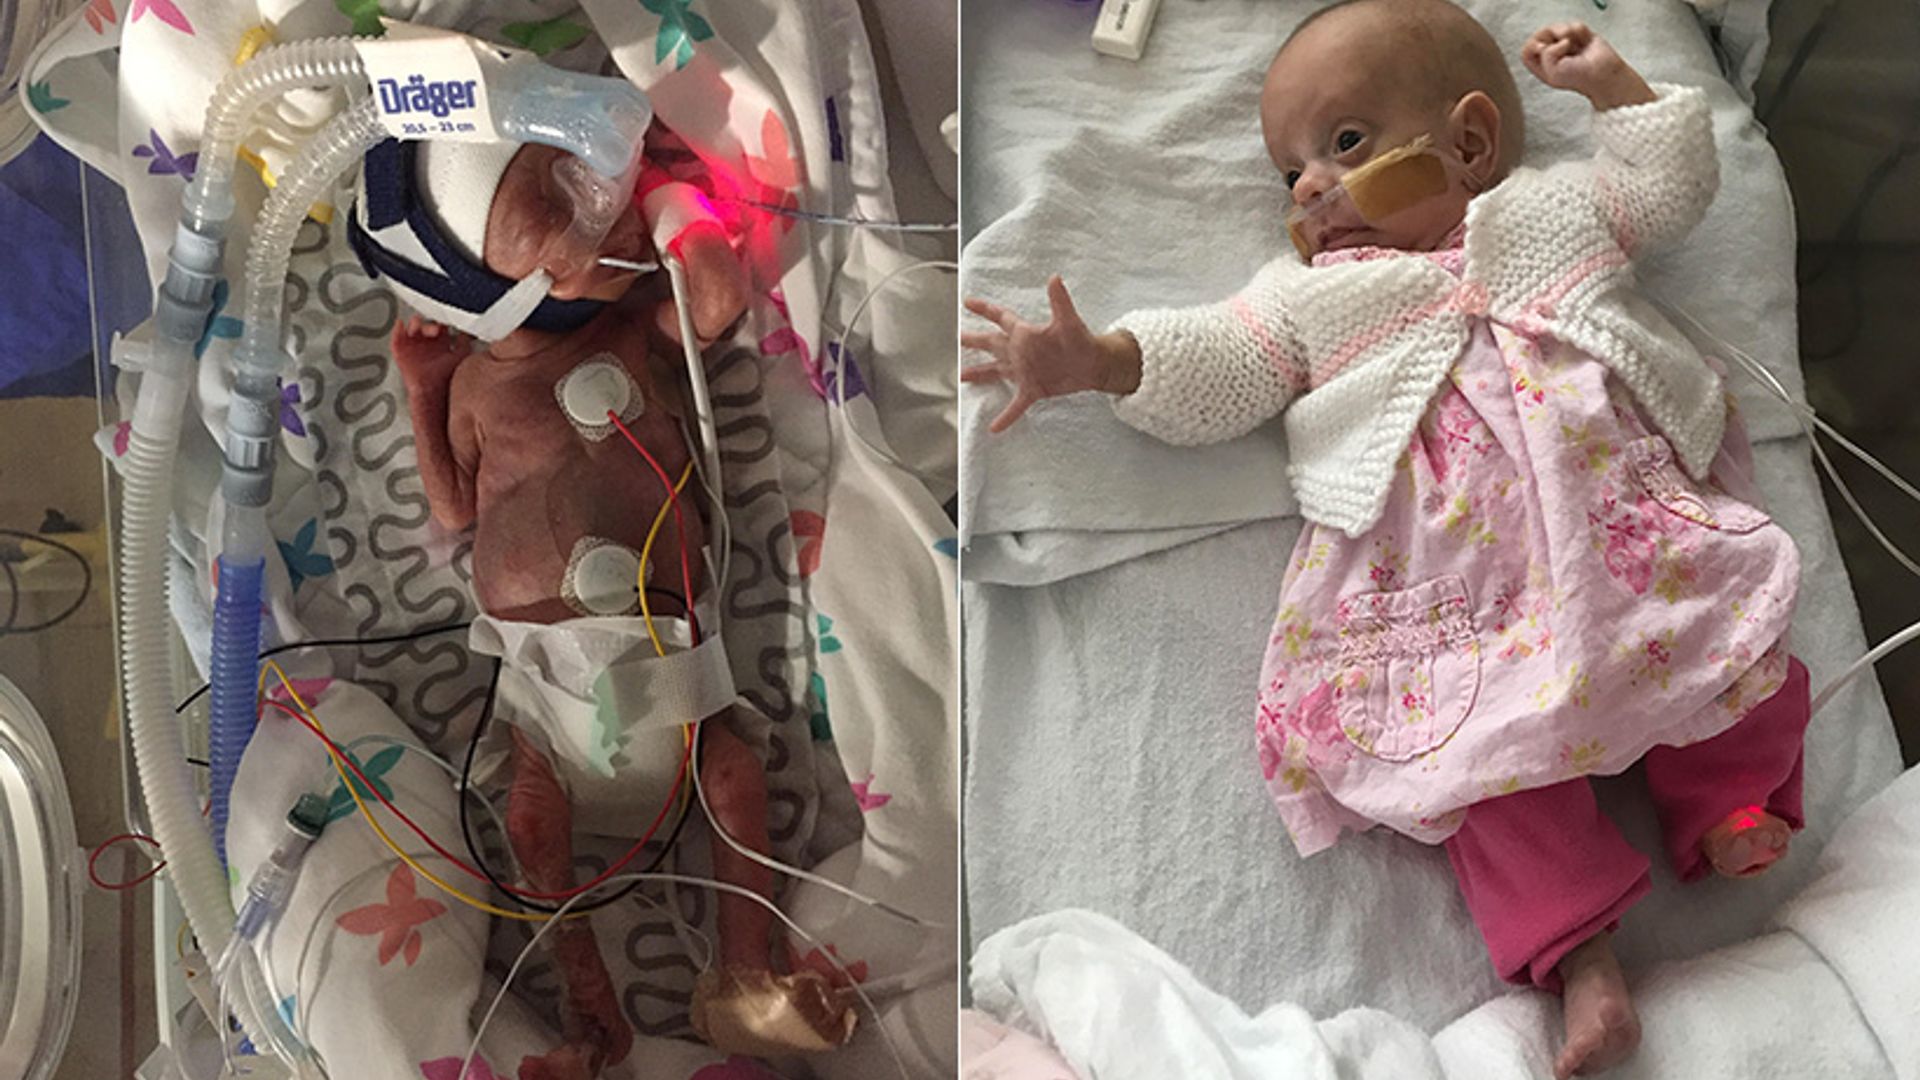 Miracle premature baby, who was one the smallest in the world, finally goes home